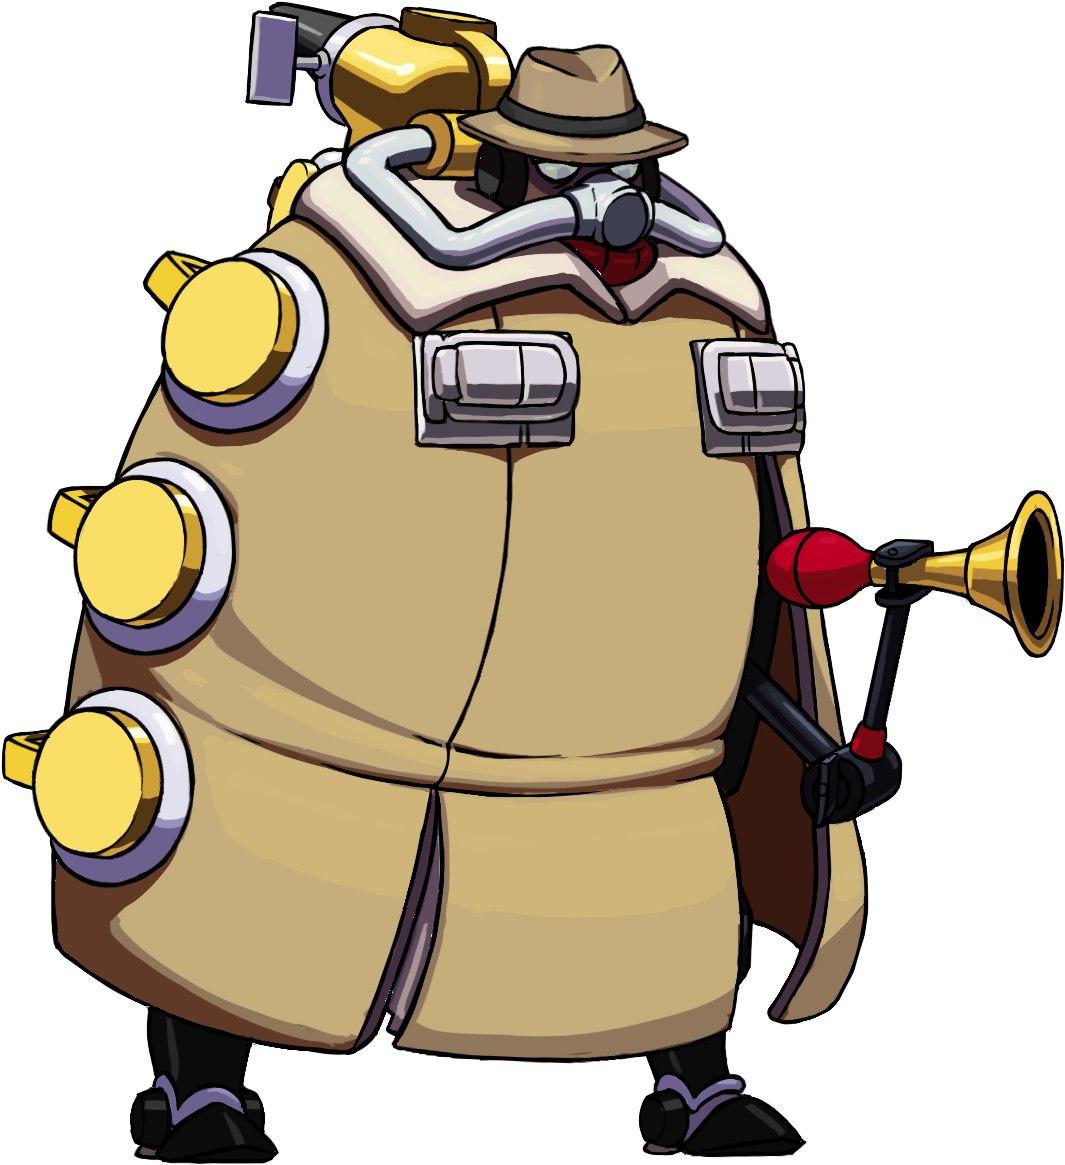 The Skullgirls Sprite Of The Day Is - Skullgirls Attacks Big Band (1104x1183)